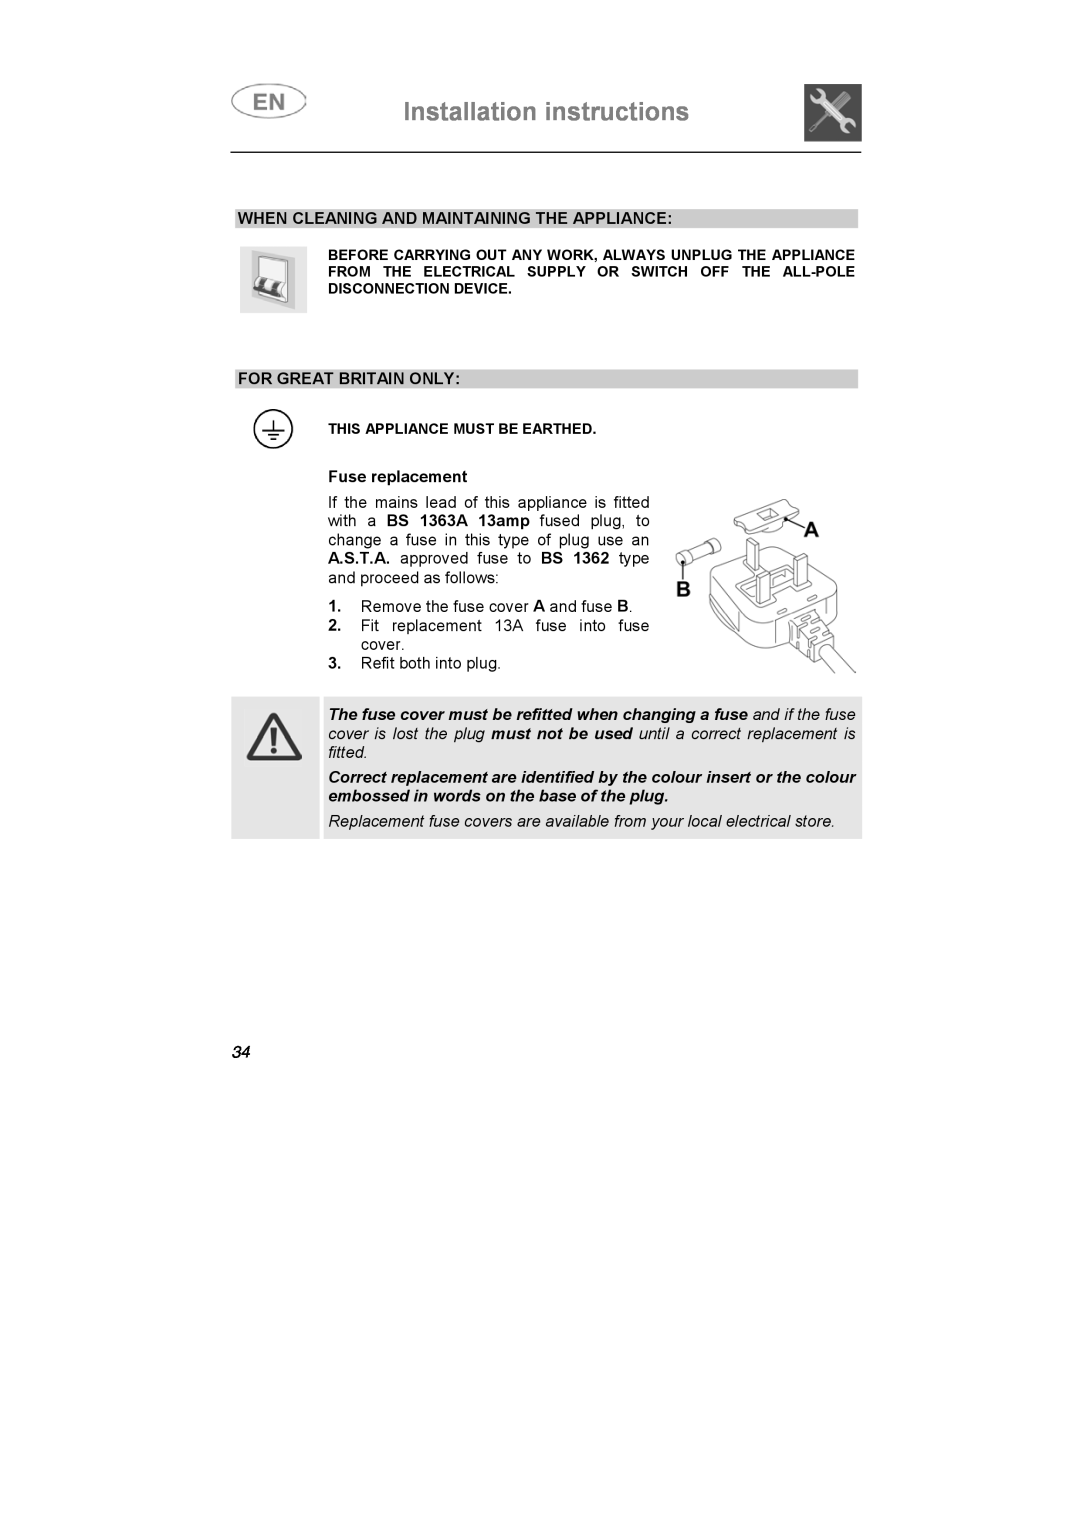 Smeg LS6147XH7 Installation instructions, When Cleaning And Maintaining The Appliance, For Great Britain Only 